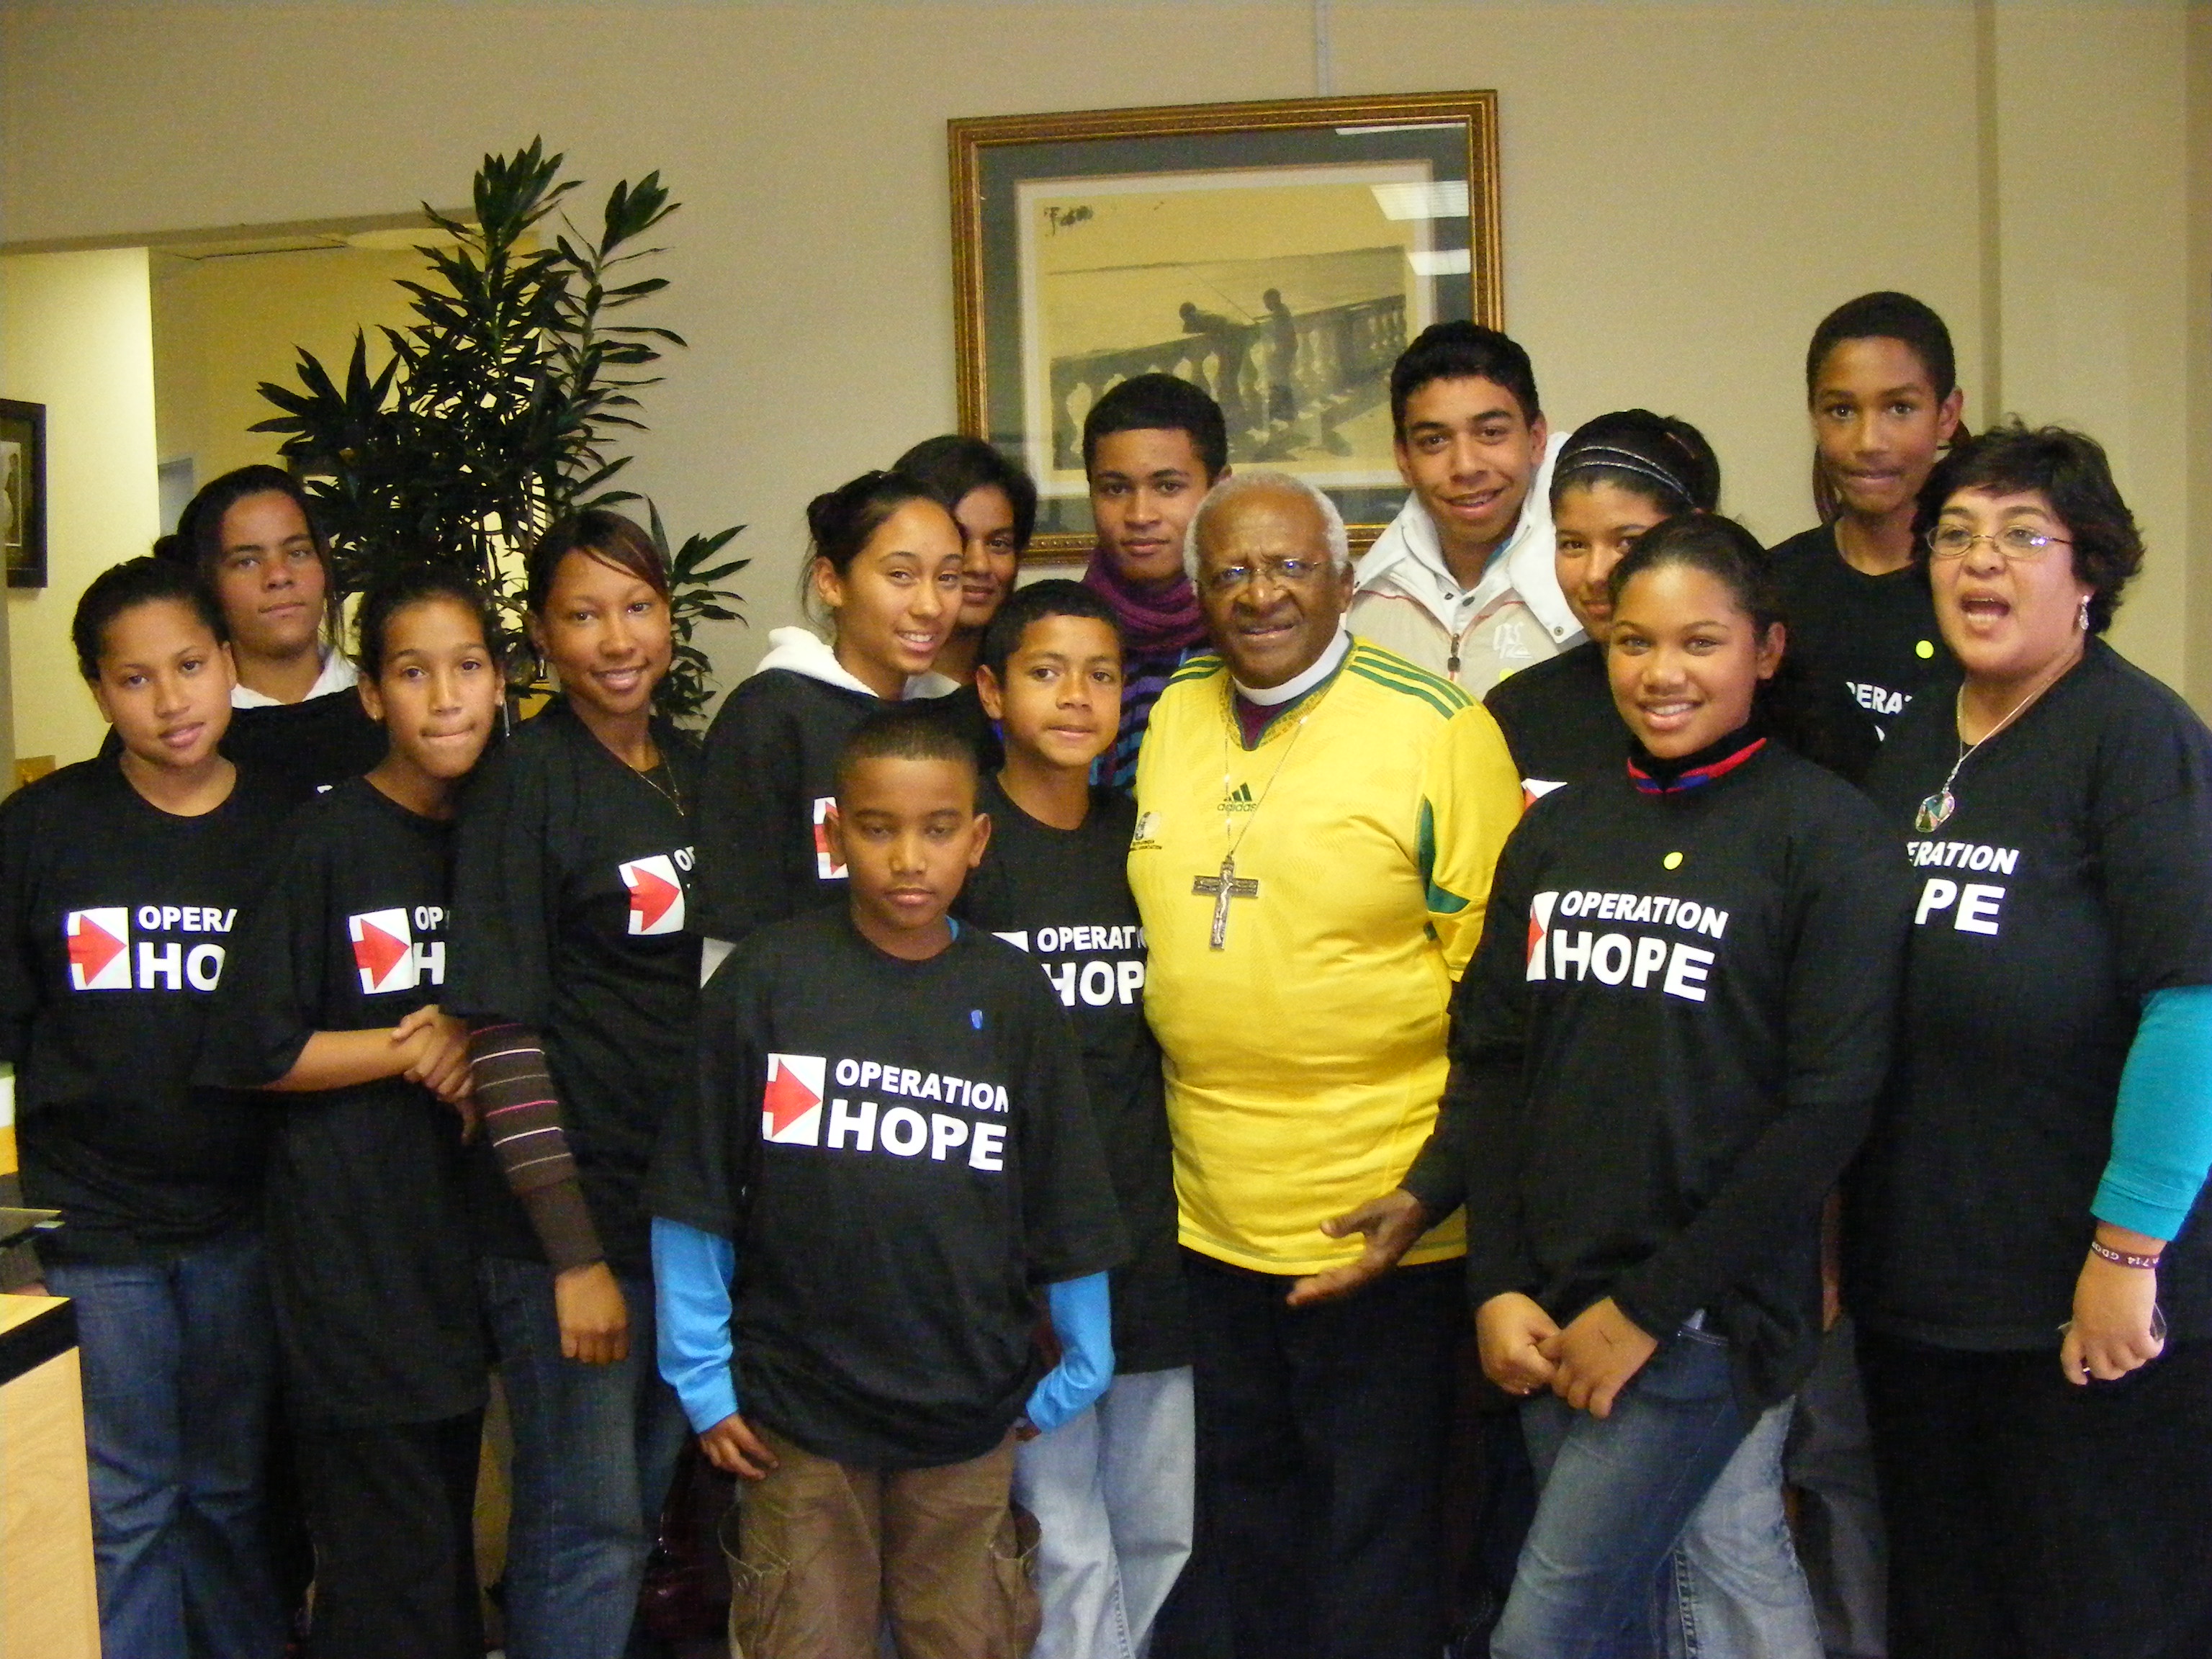 archbishop-tutu-operation-hope-founder-john-hope-bryant-promote-financial-literacy-empowerment-and-dignity-in-south-africa_5